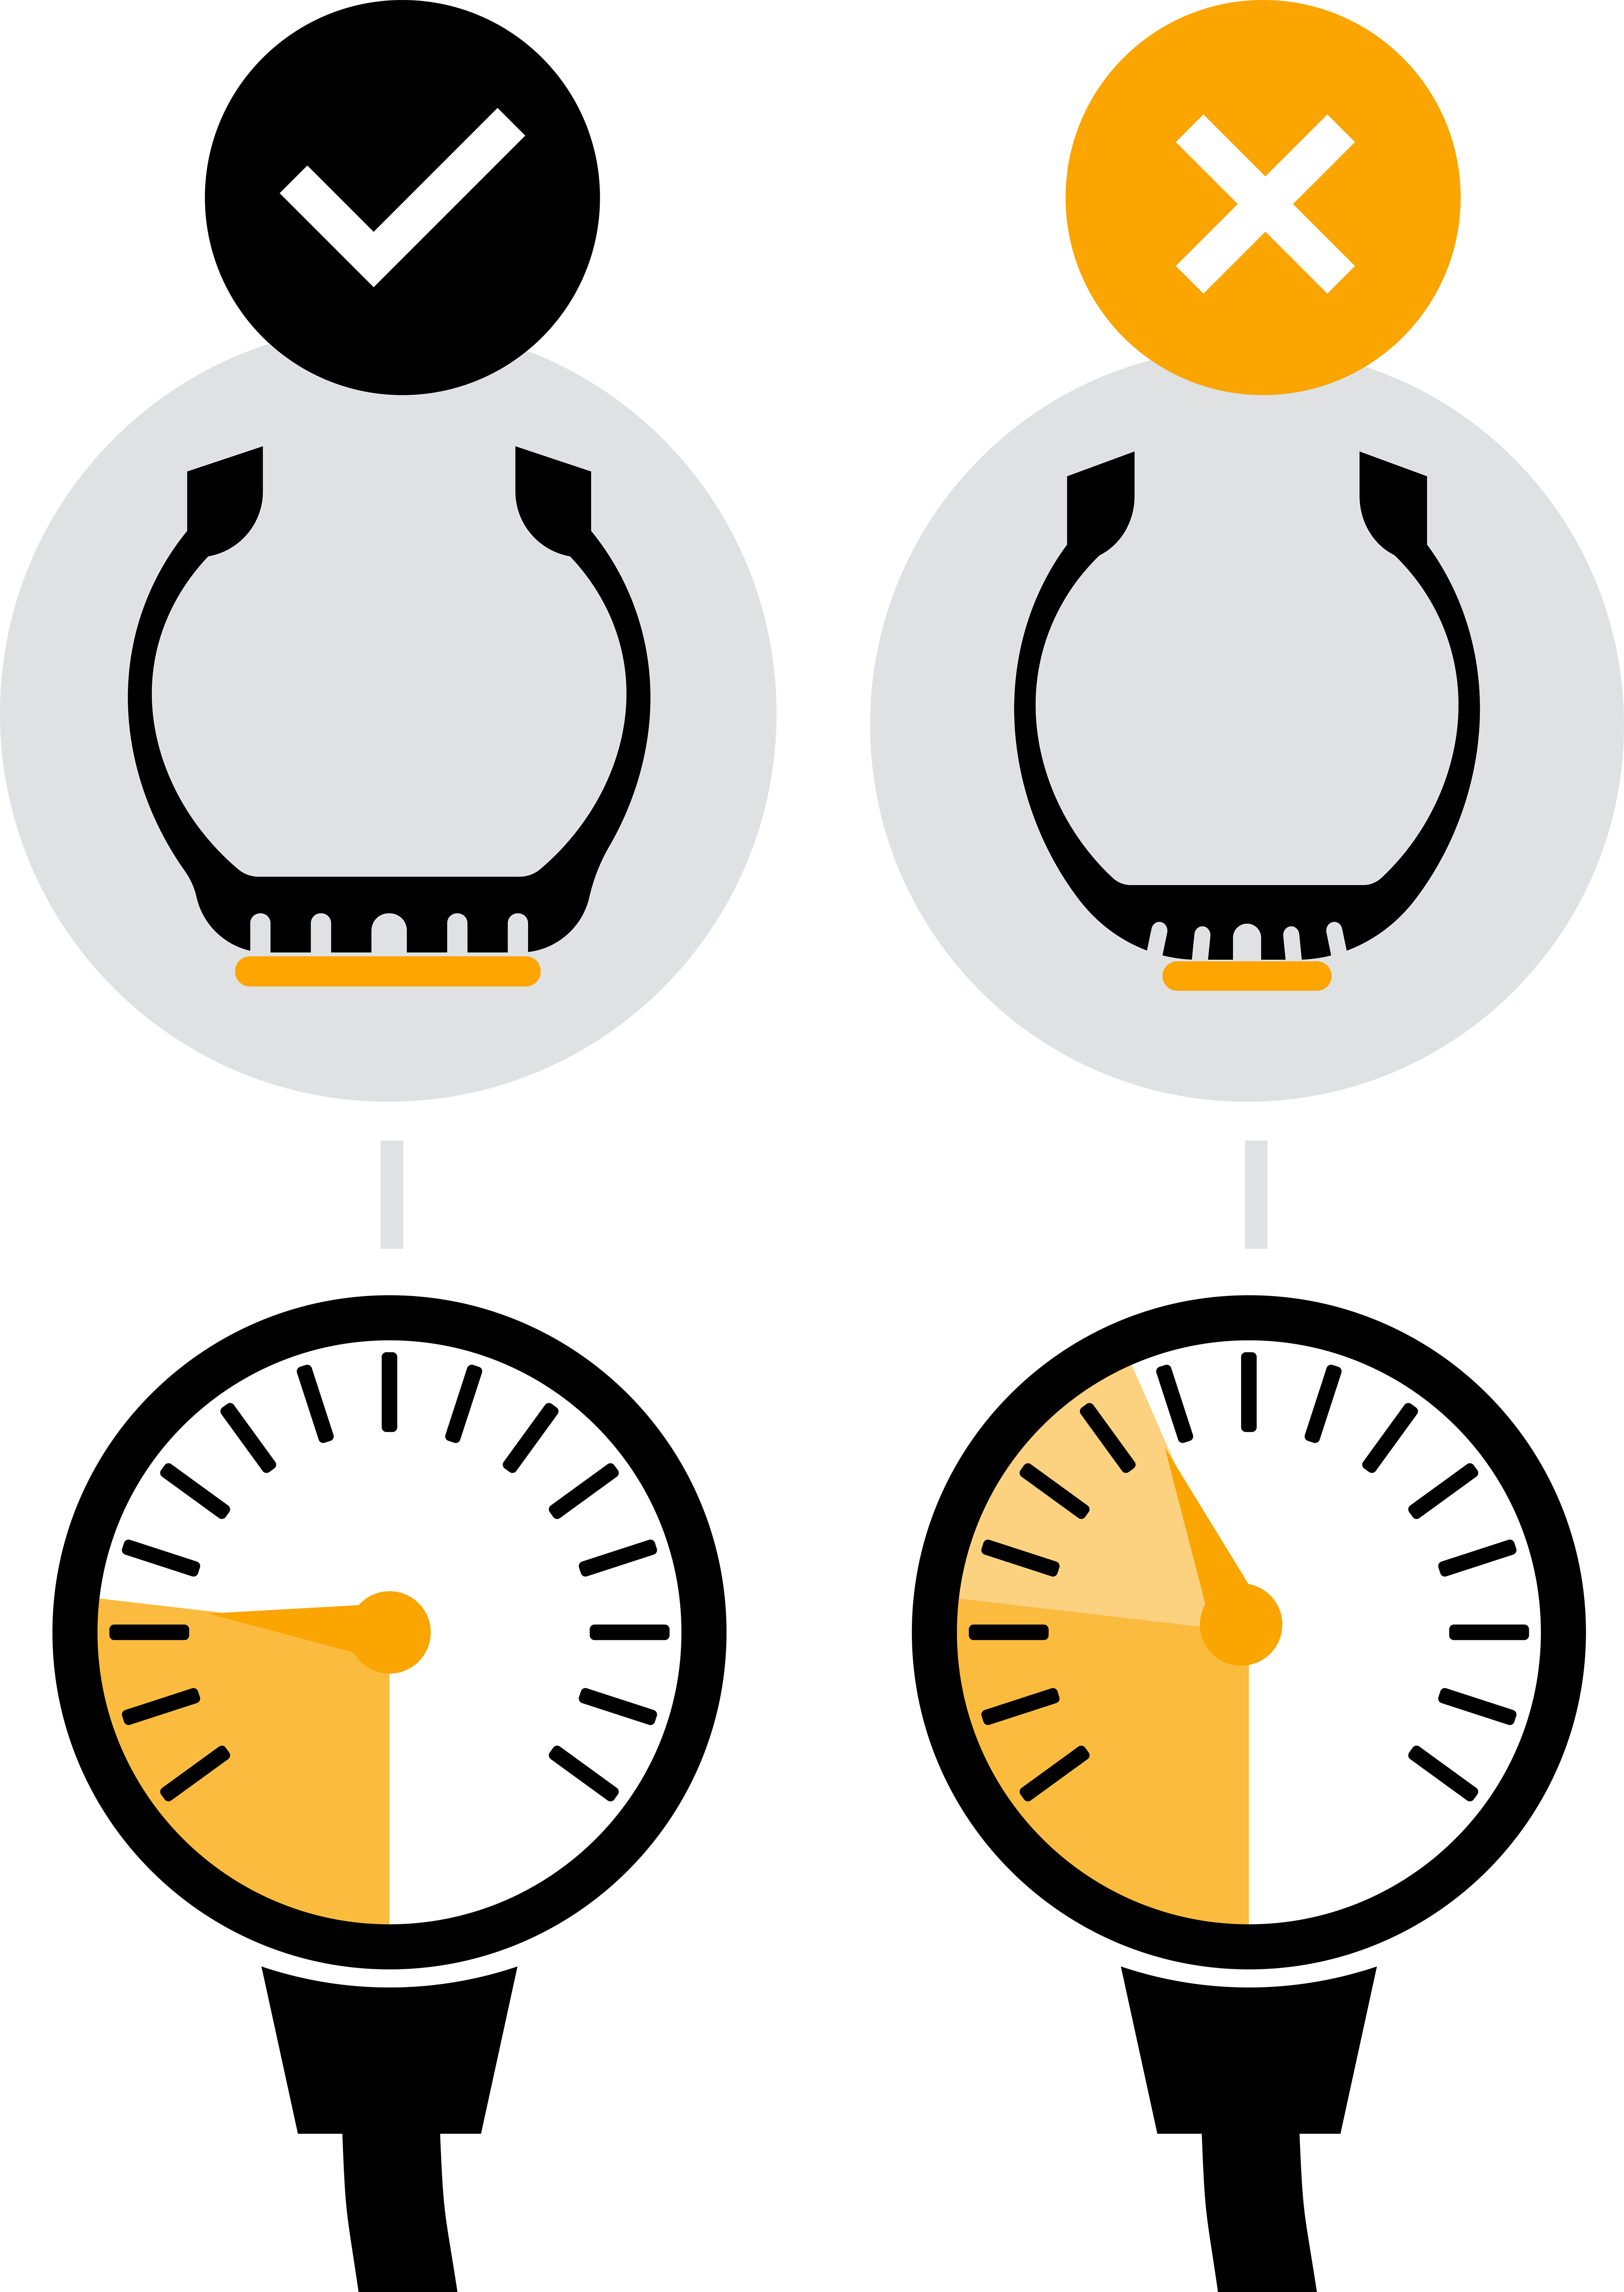 Two tire profiles with correct and wrong tire pressure together with two gauges are shown.